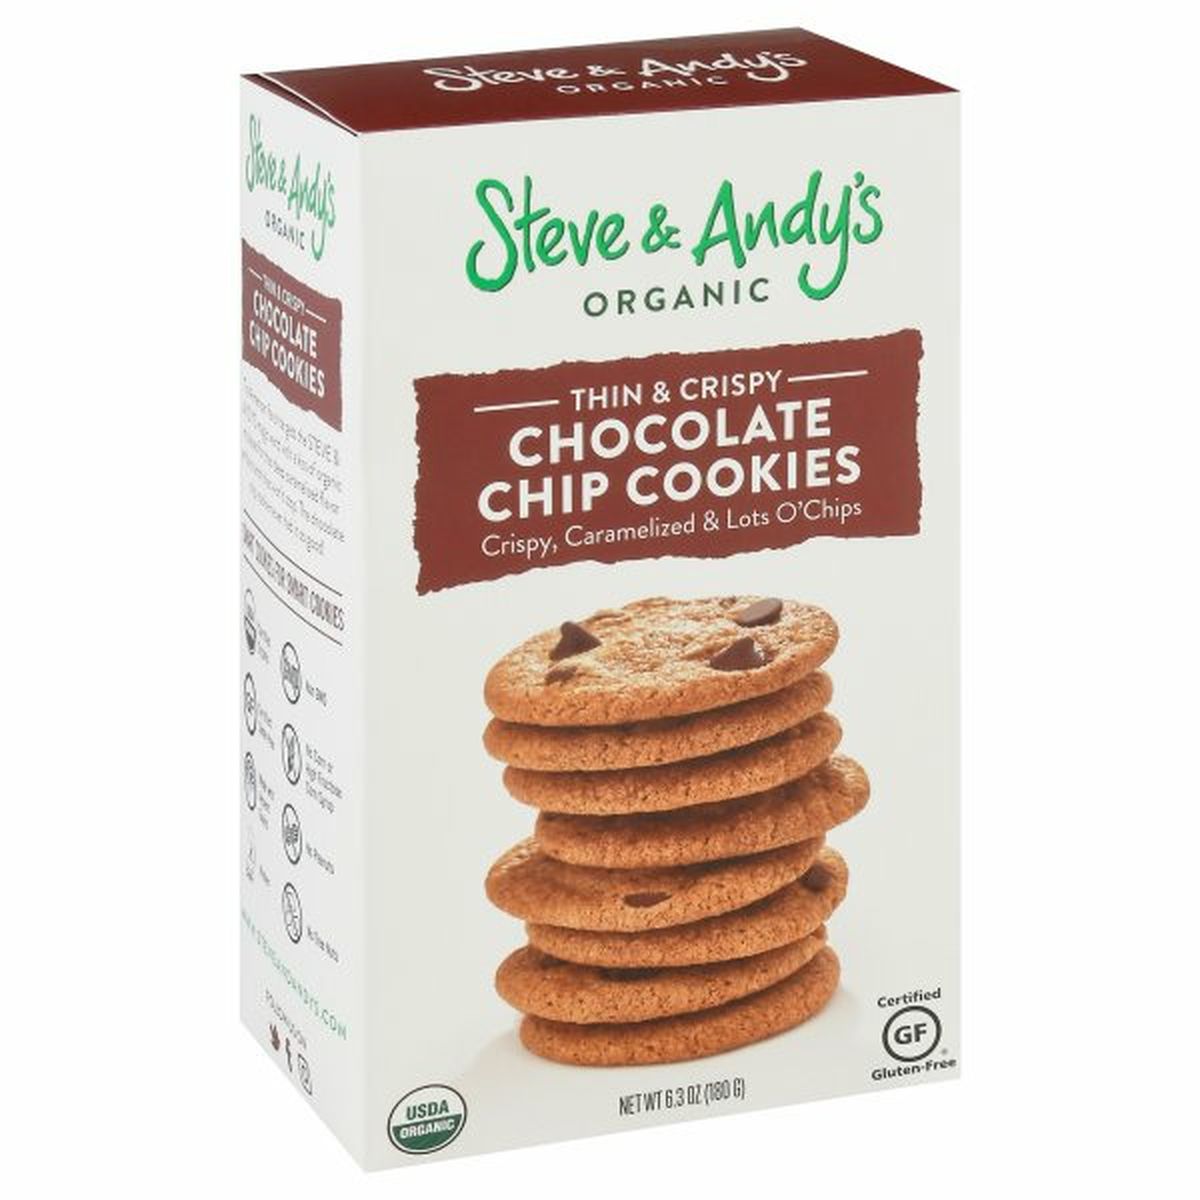 Calories in Steve & Andy's Organic Cookies, Chocolate Chip, Thin & Crispy